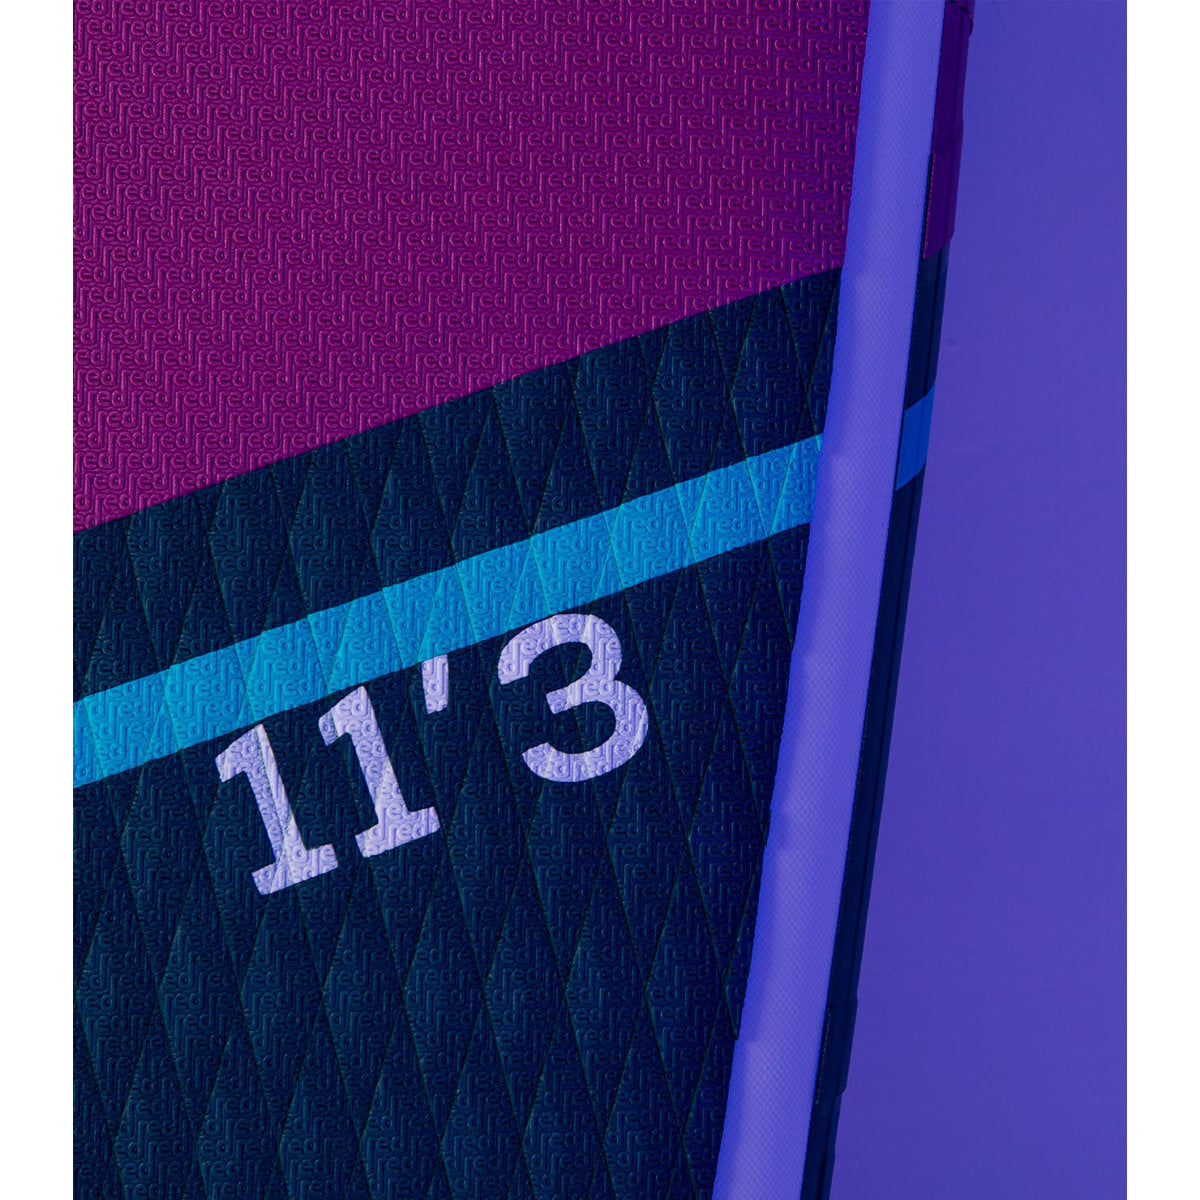 
                  
                    Red Paddle Co. 11'3 Sport Package Purple 2022 - FREE Shipping 🛻 ** 1-2 WEEKS  🚚**
                  
                